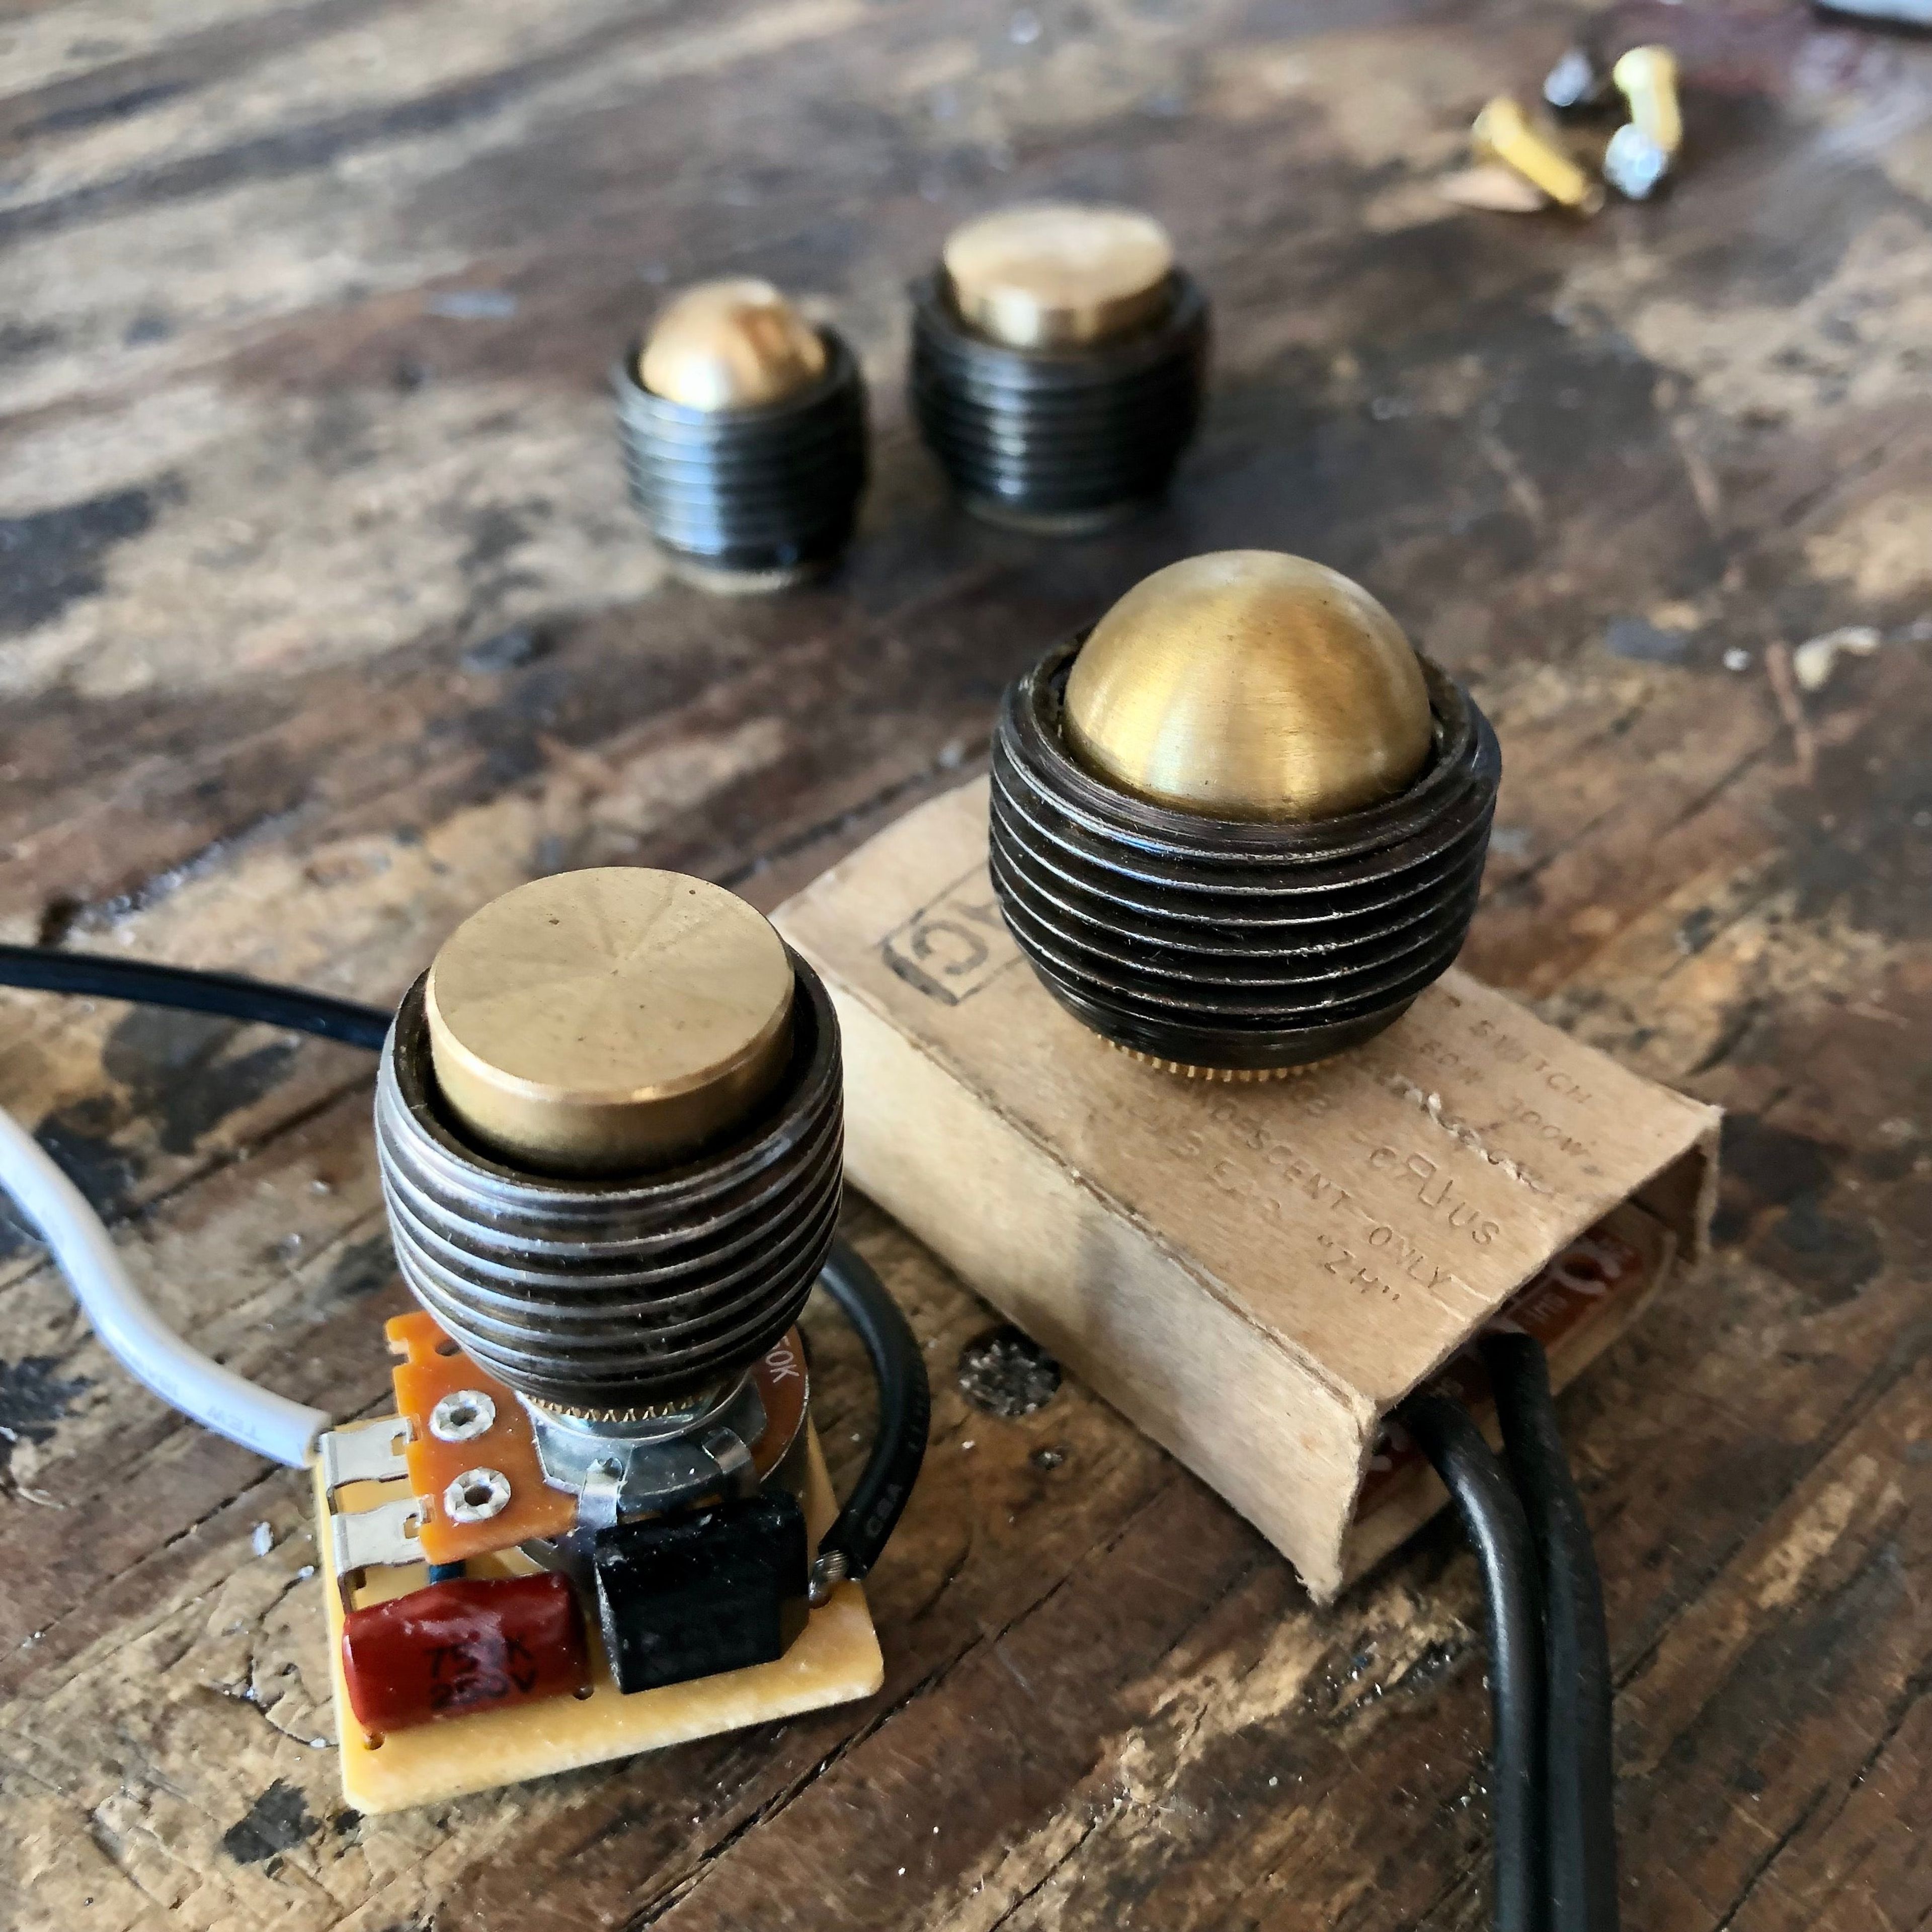 Turn Knob - Dimmer knob replacement